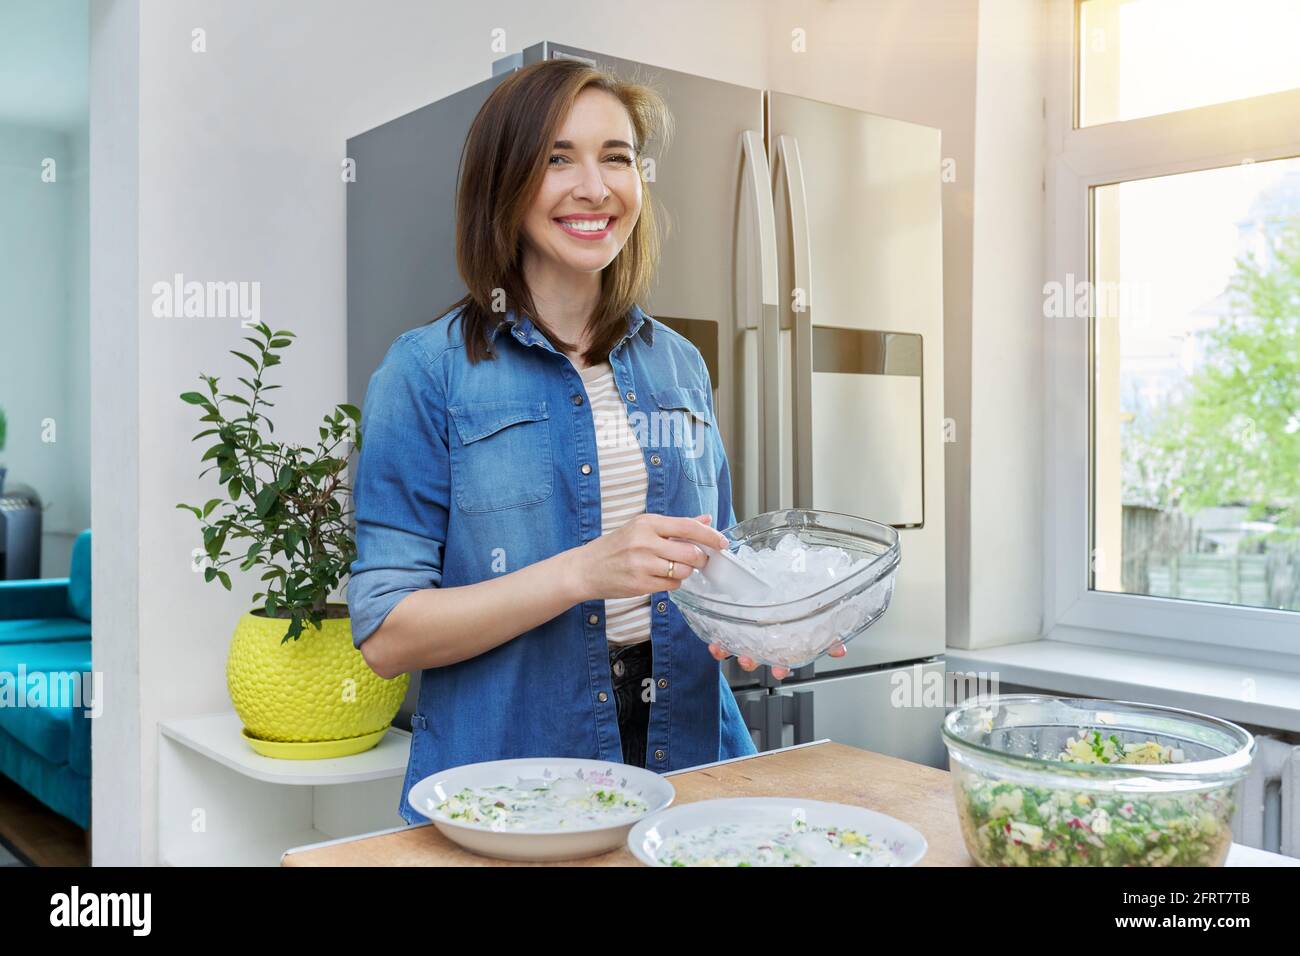 Smiling woman in kitchen near refrigerator with ice for cooling food Stock Photo